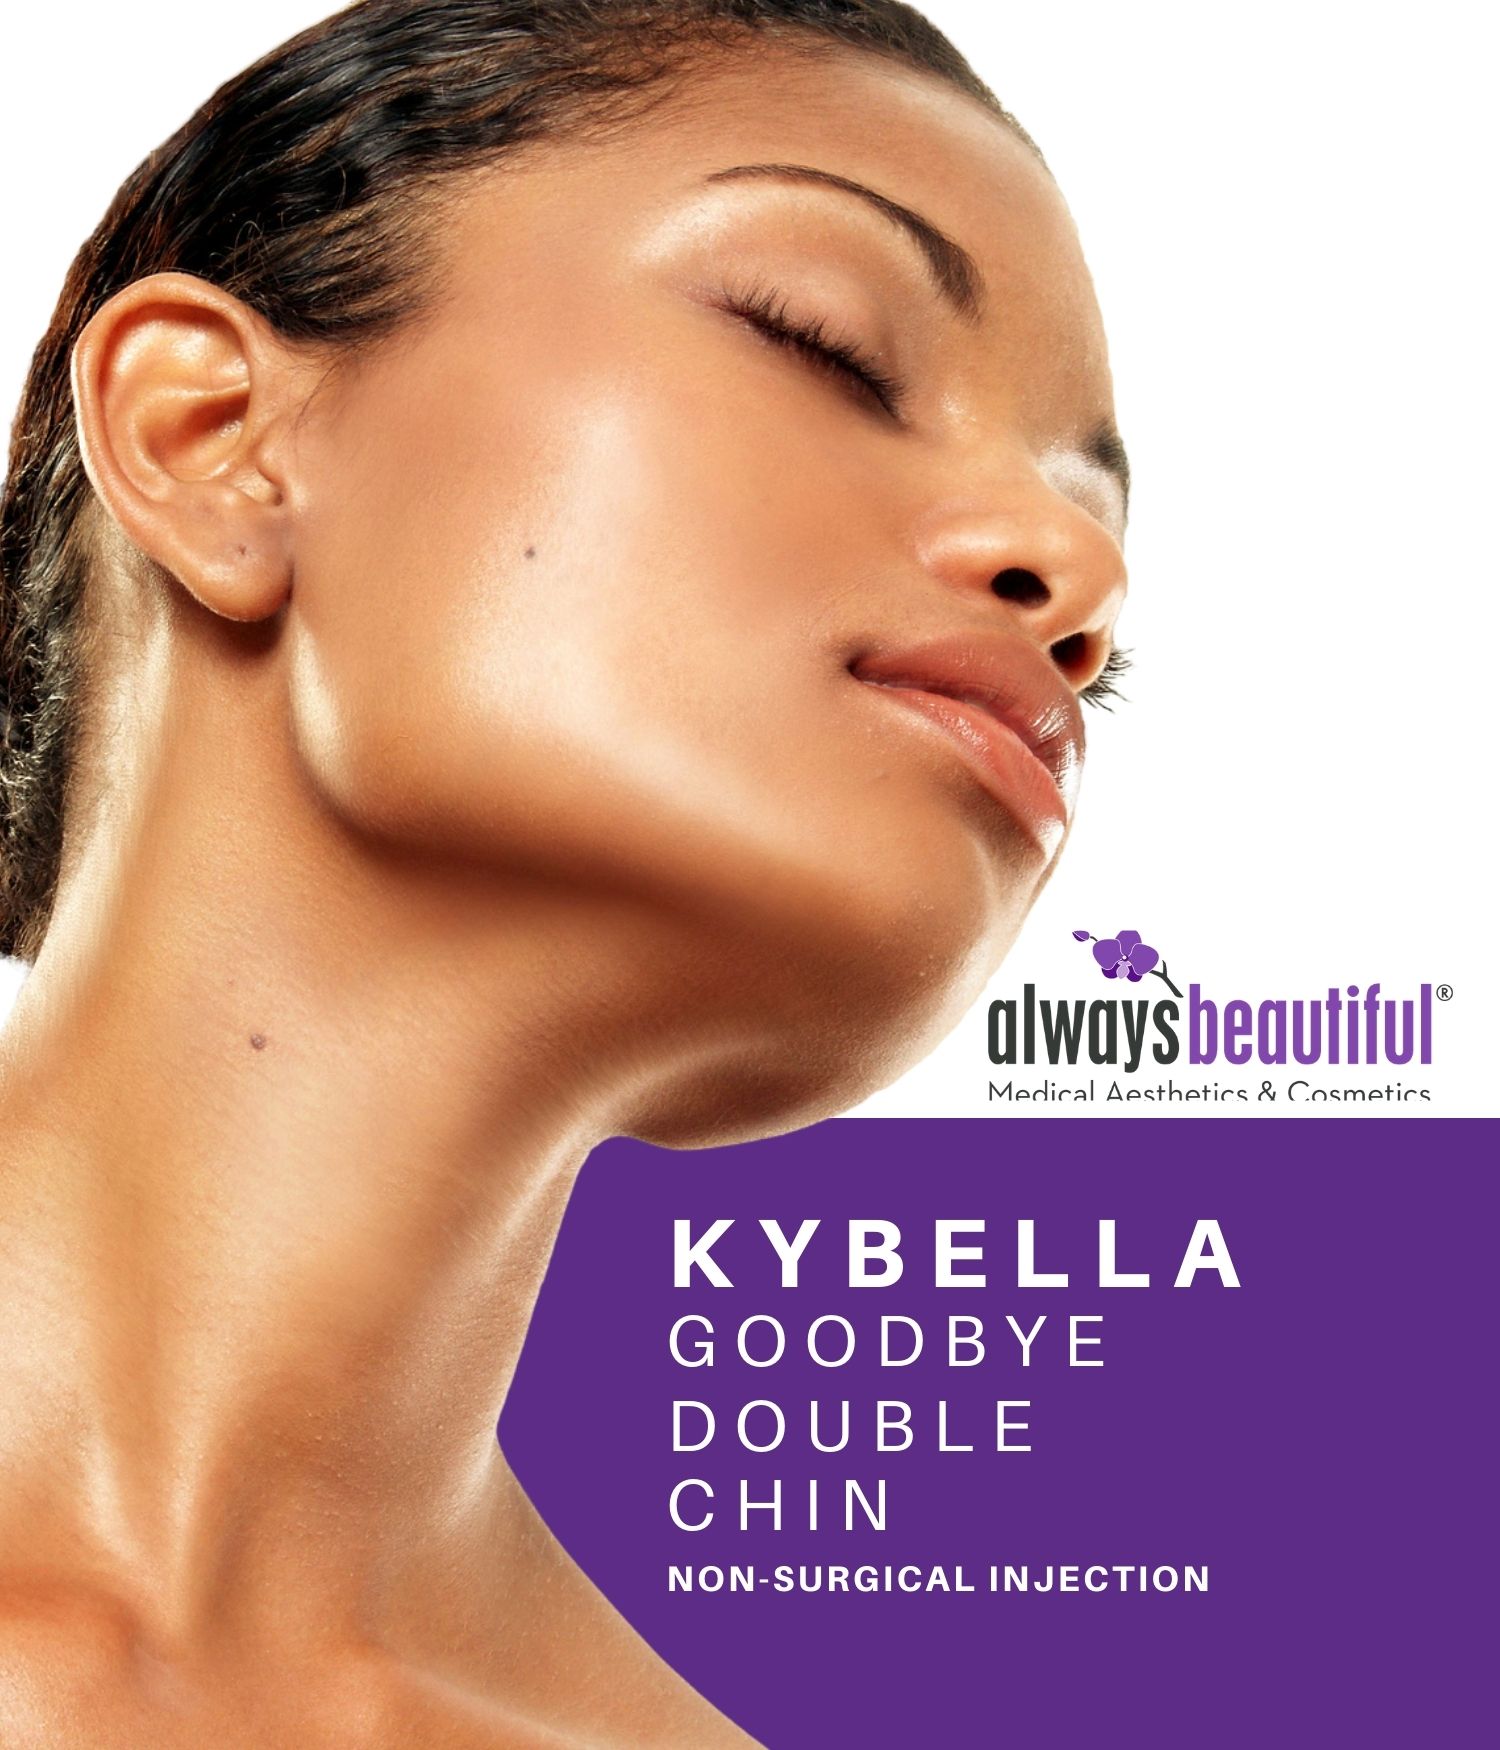 Woman with sculpted and defined chin after kybella treatment at Always Beautiful in Aurora, CO.